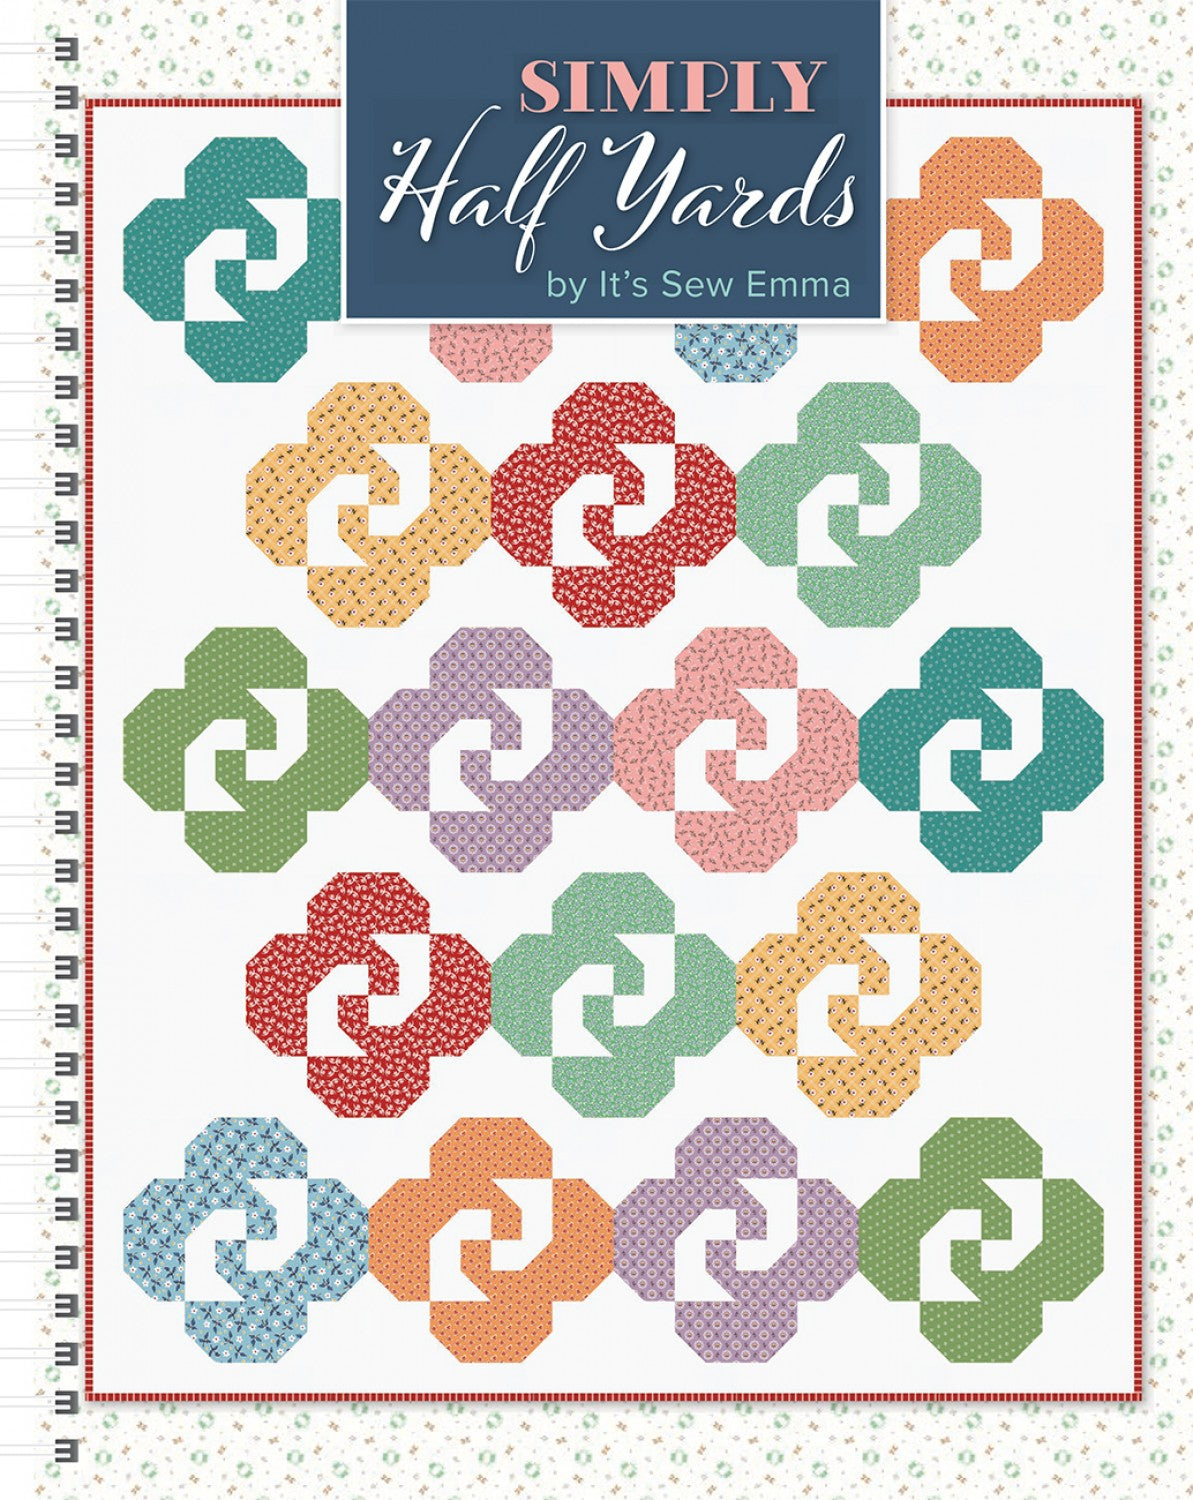 Simply Half Yards Quilt Pattern Book by Kimberly Jolly for It's Sew Emma